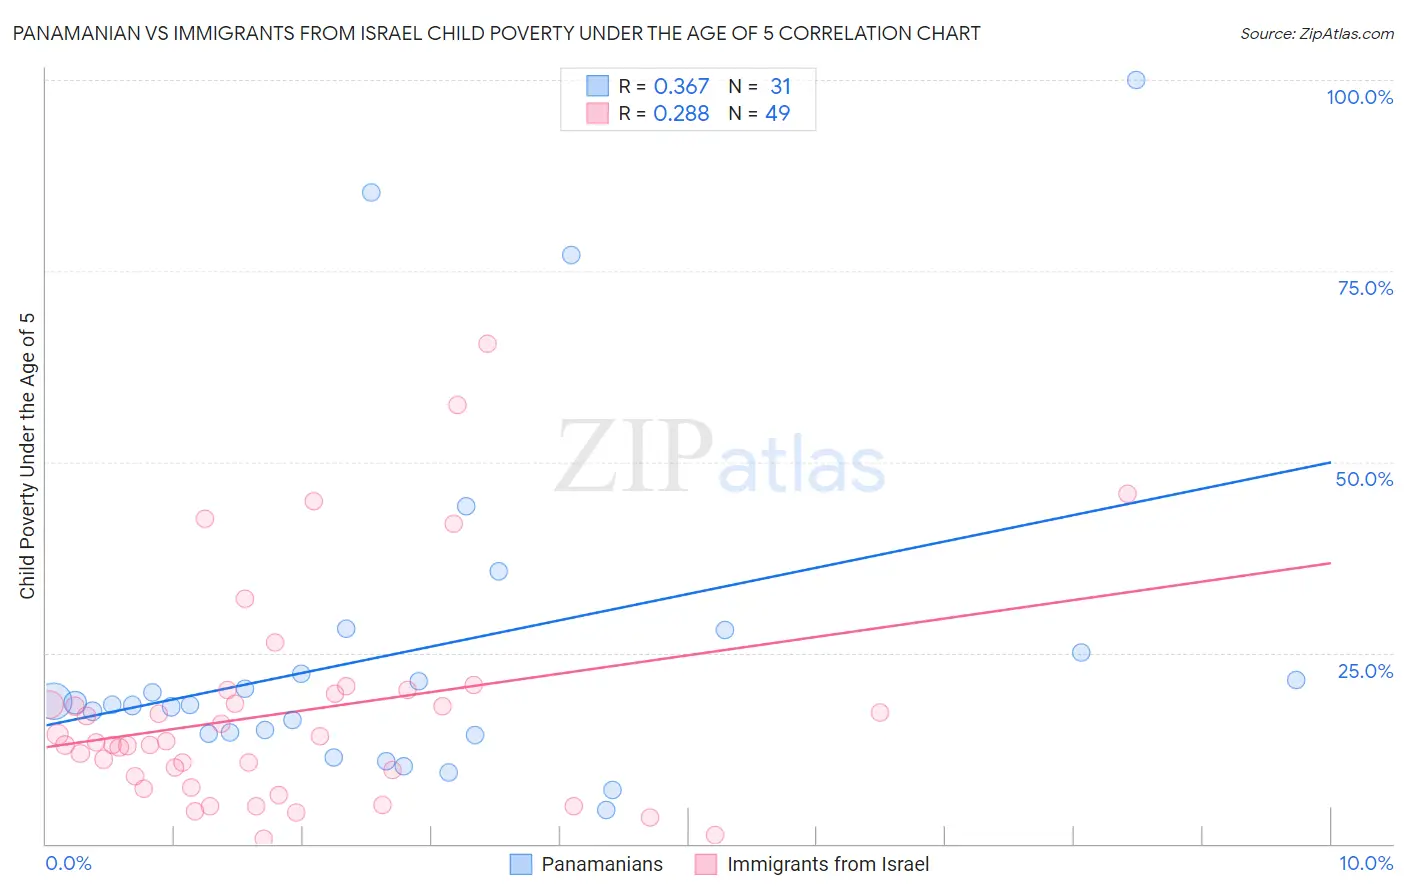 Panamanian vs Immigrants from Israel Child Poverty Under the Age of 5